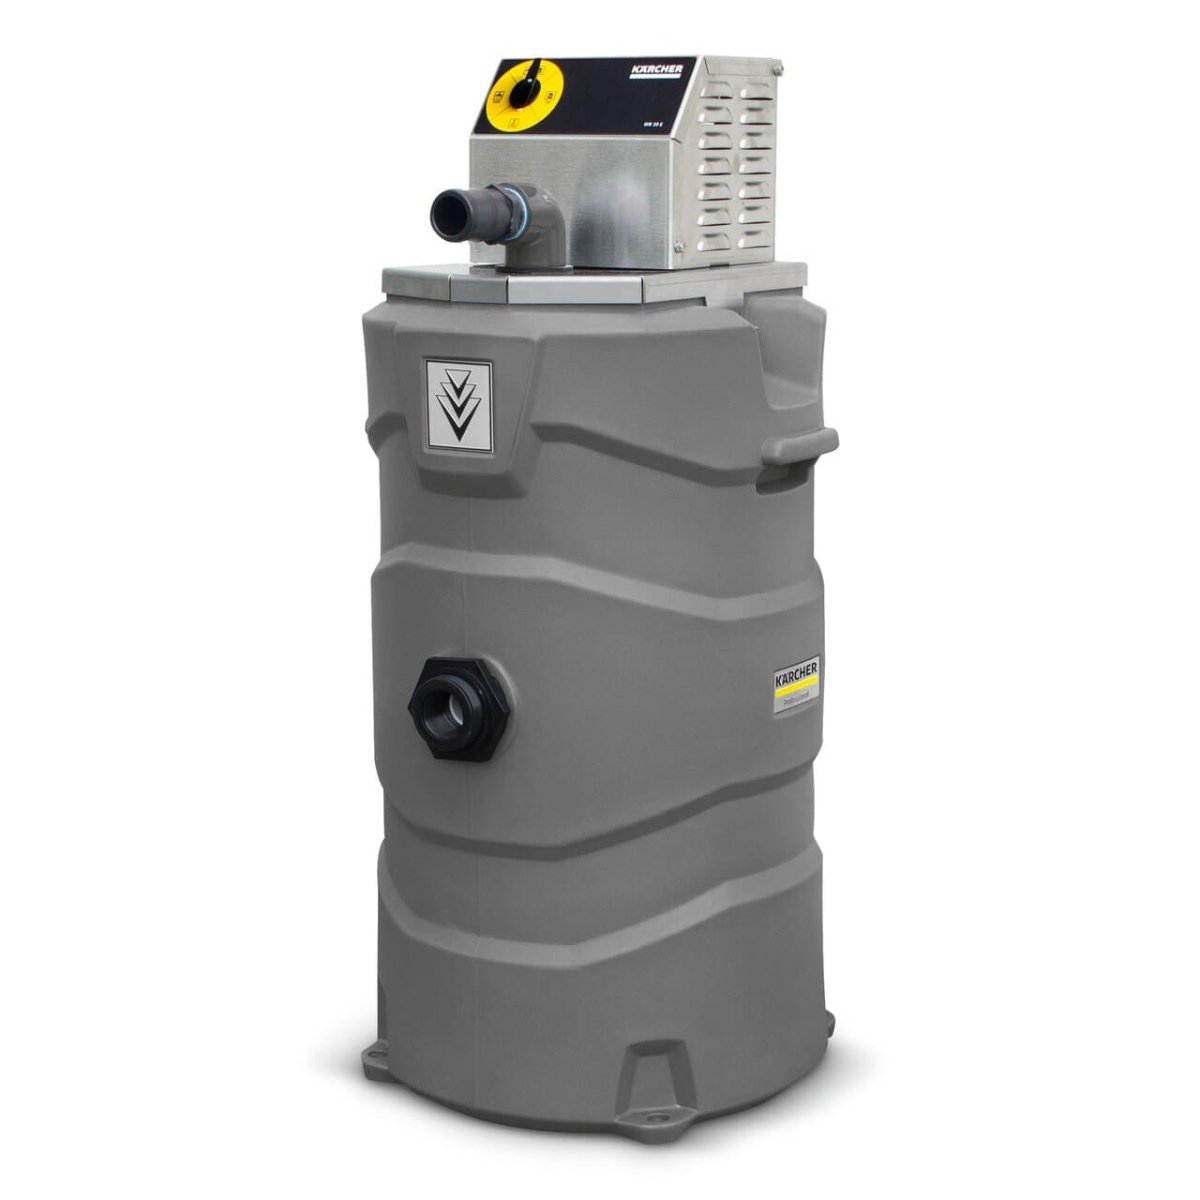 Mississippi Water Recovery System - Karcher